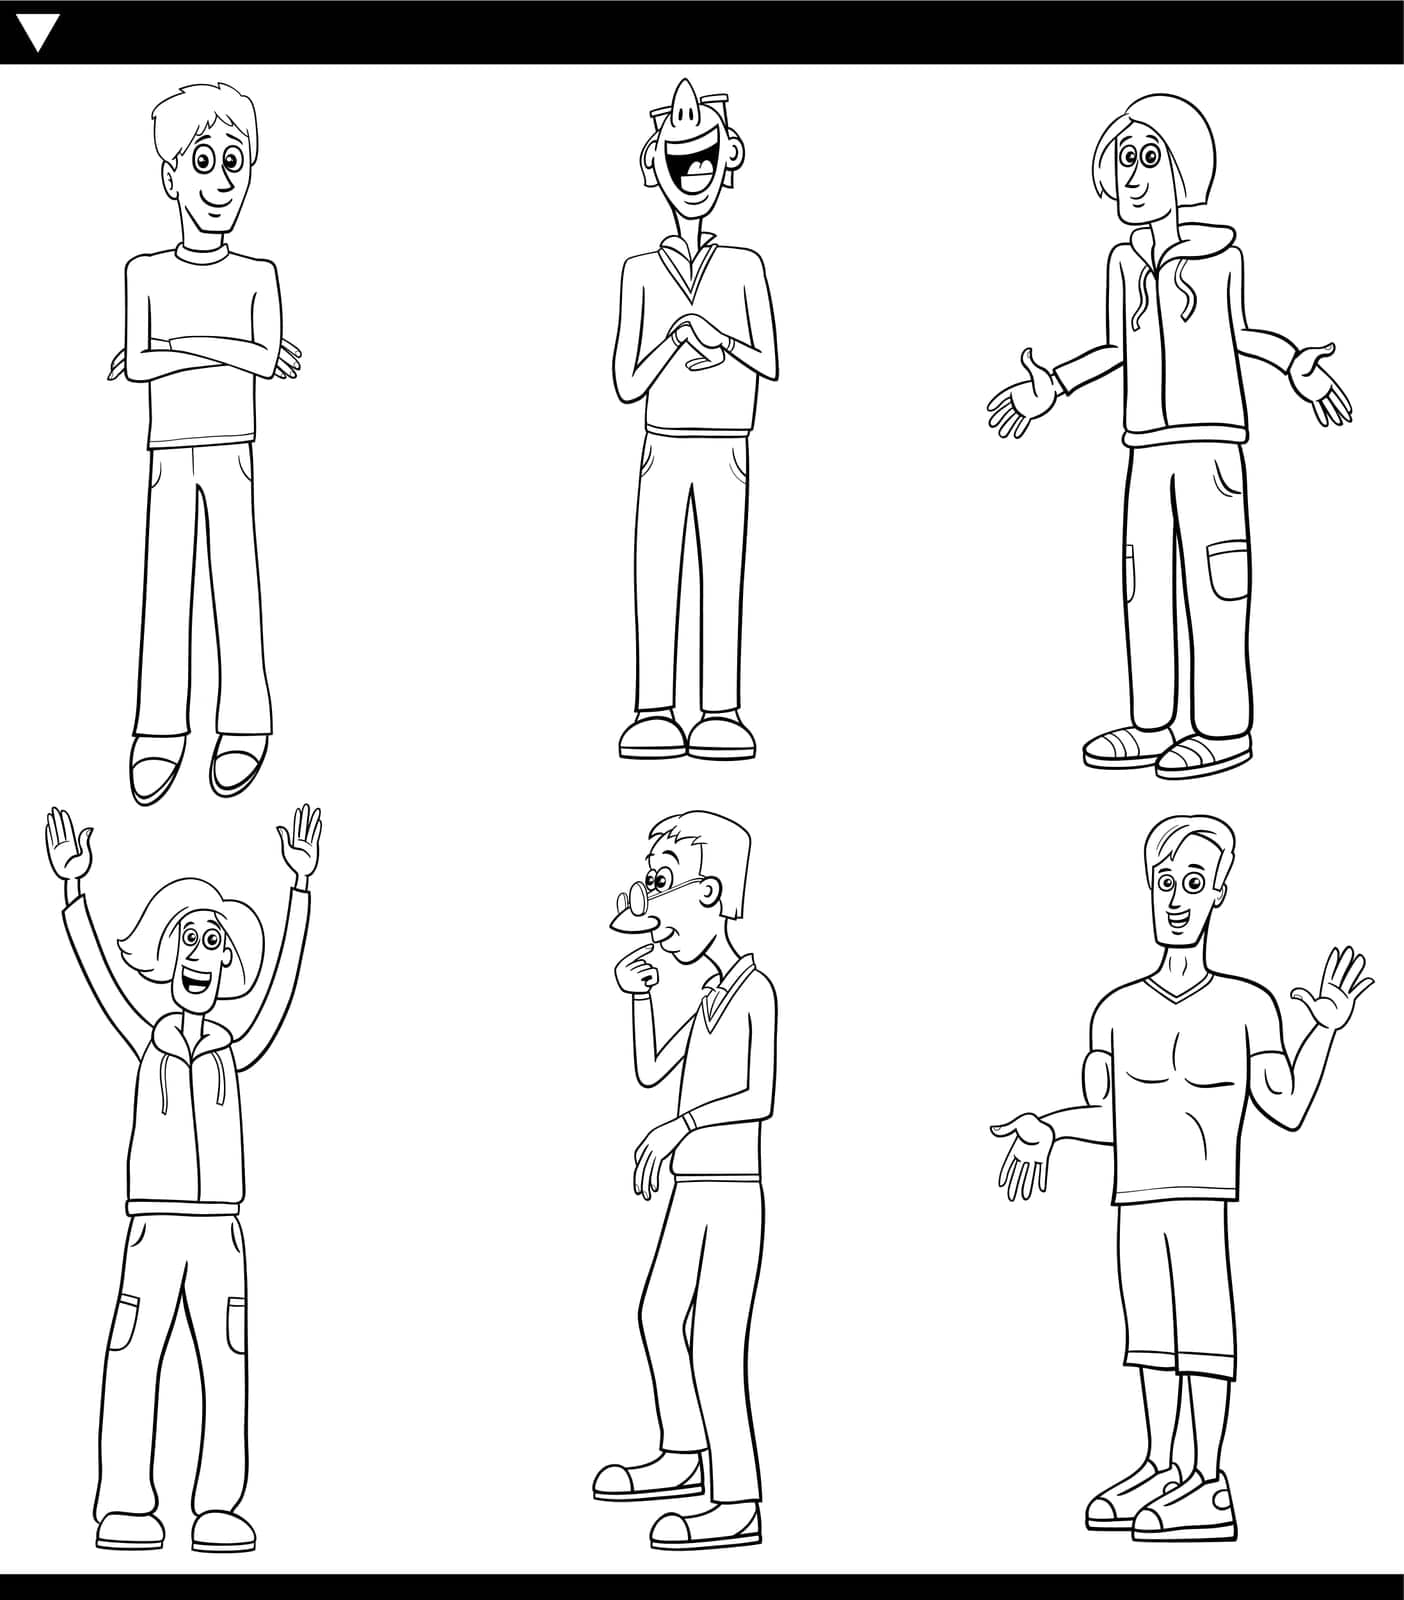 Cartoon illustration of funny young men comic characters set coloring page